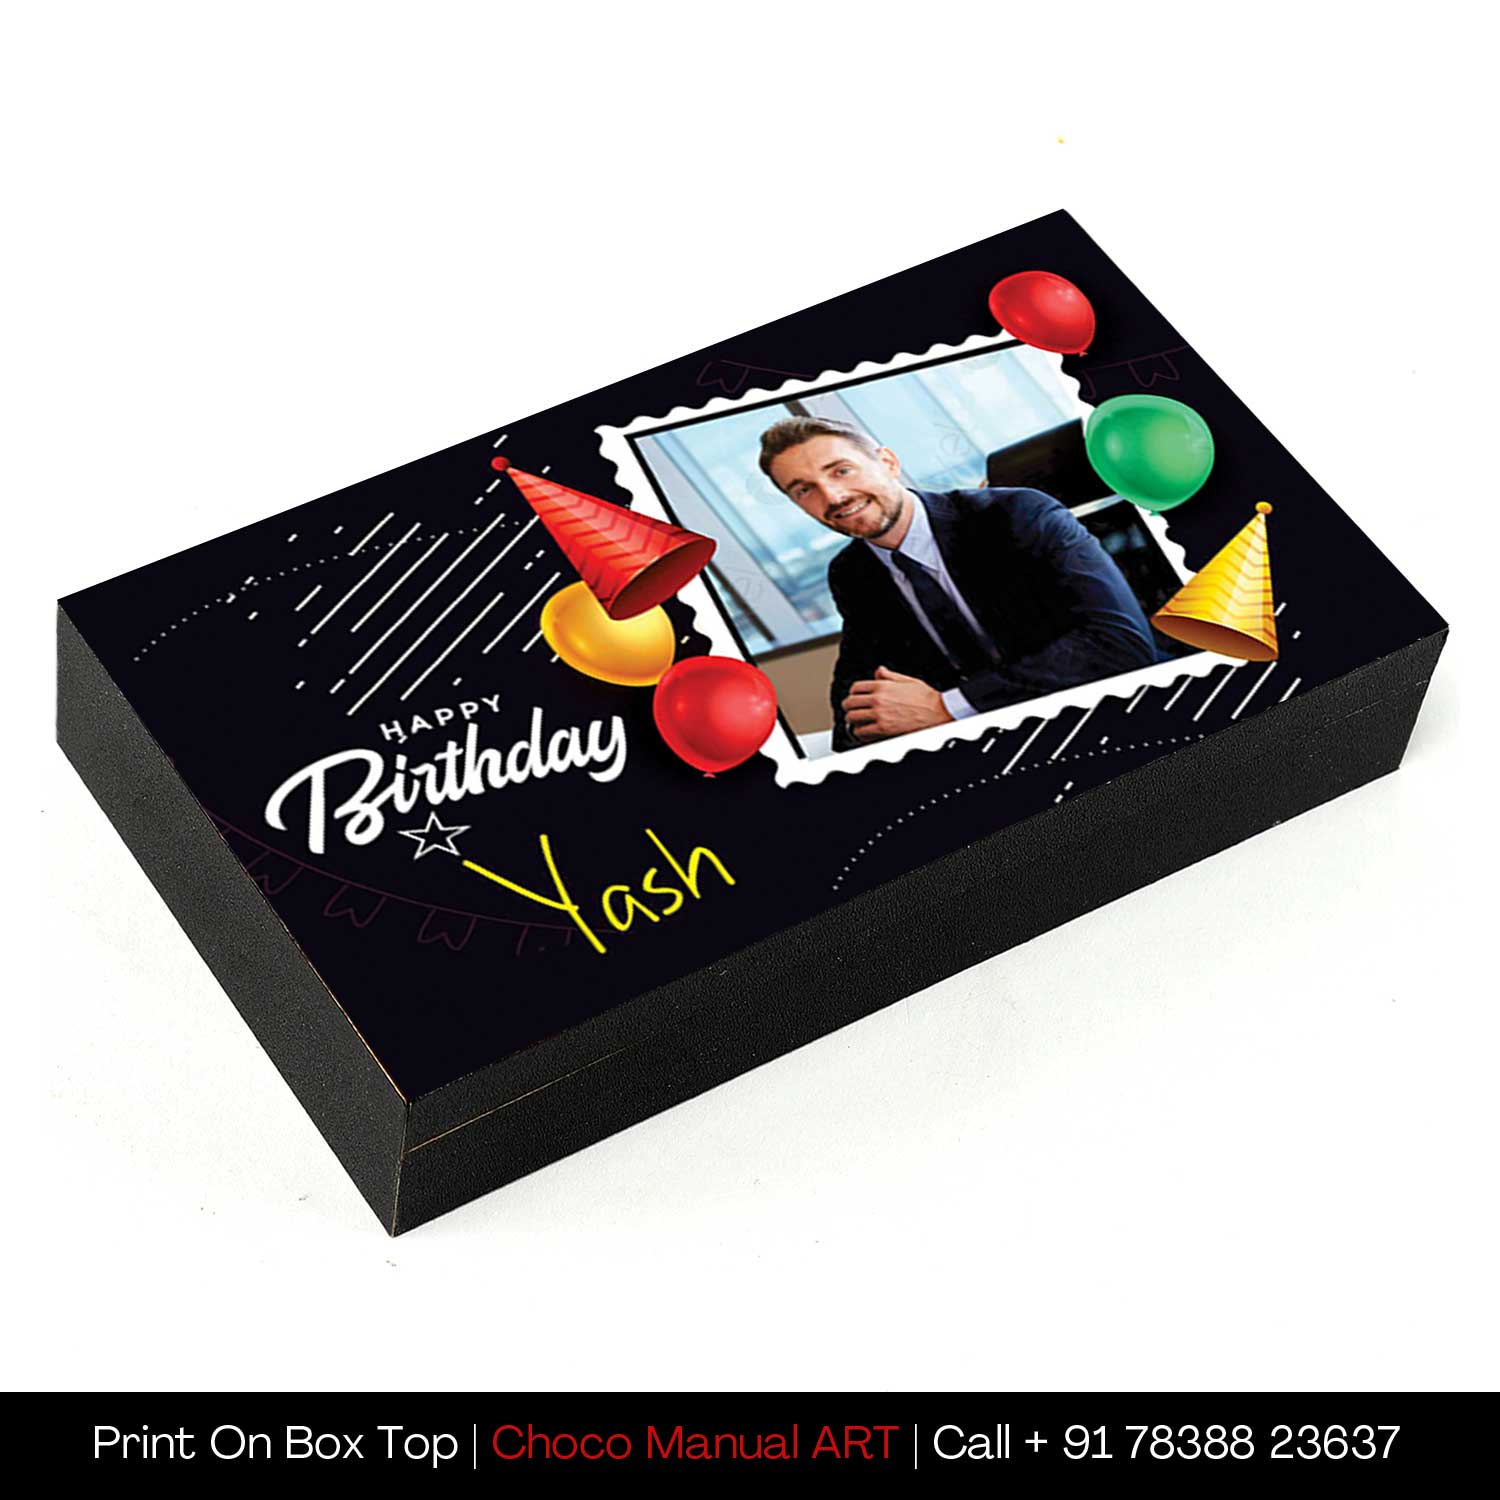 Best Customized Gifts with Personal Photo and Message